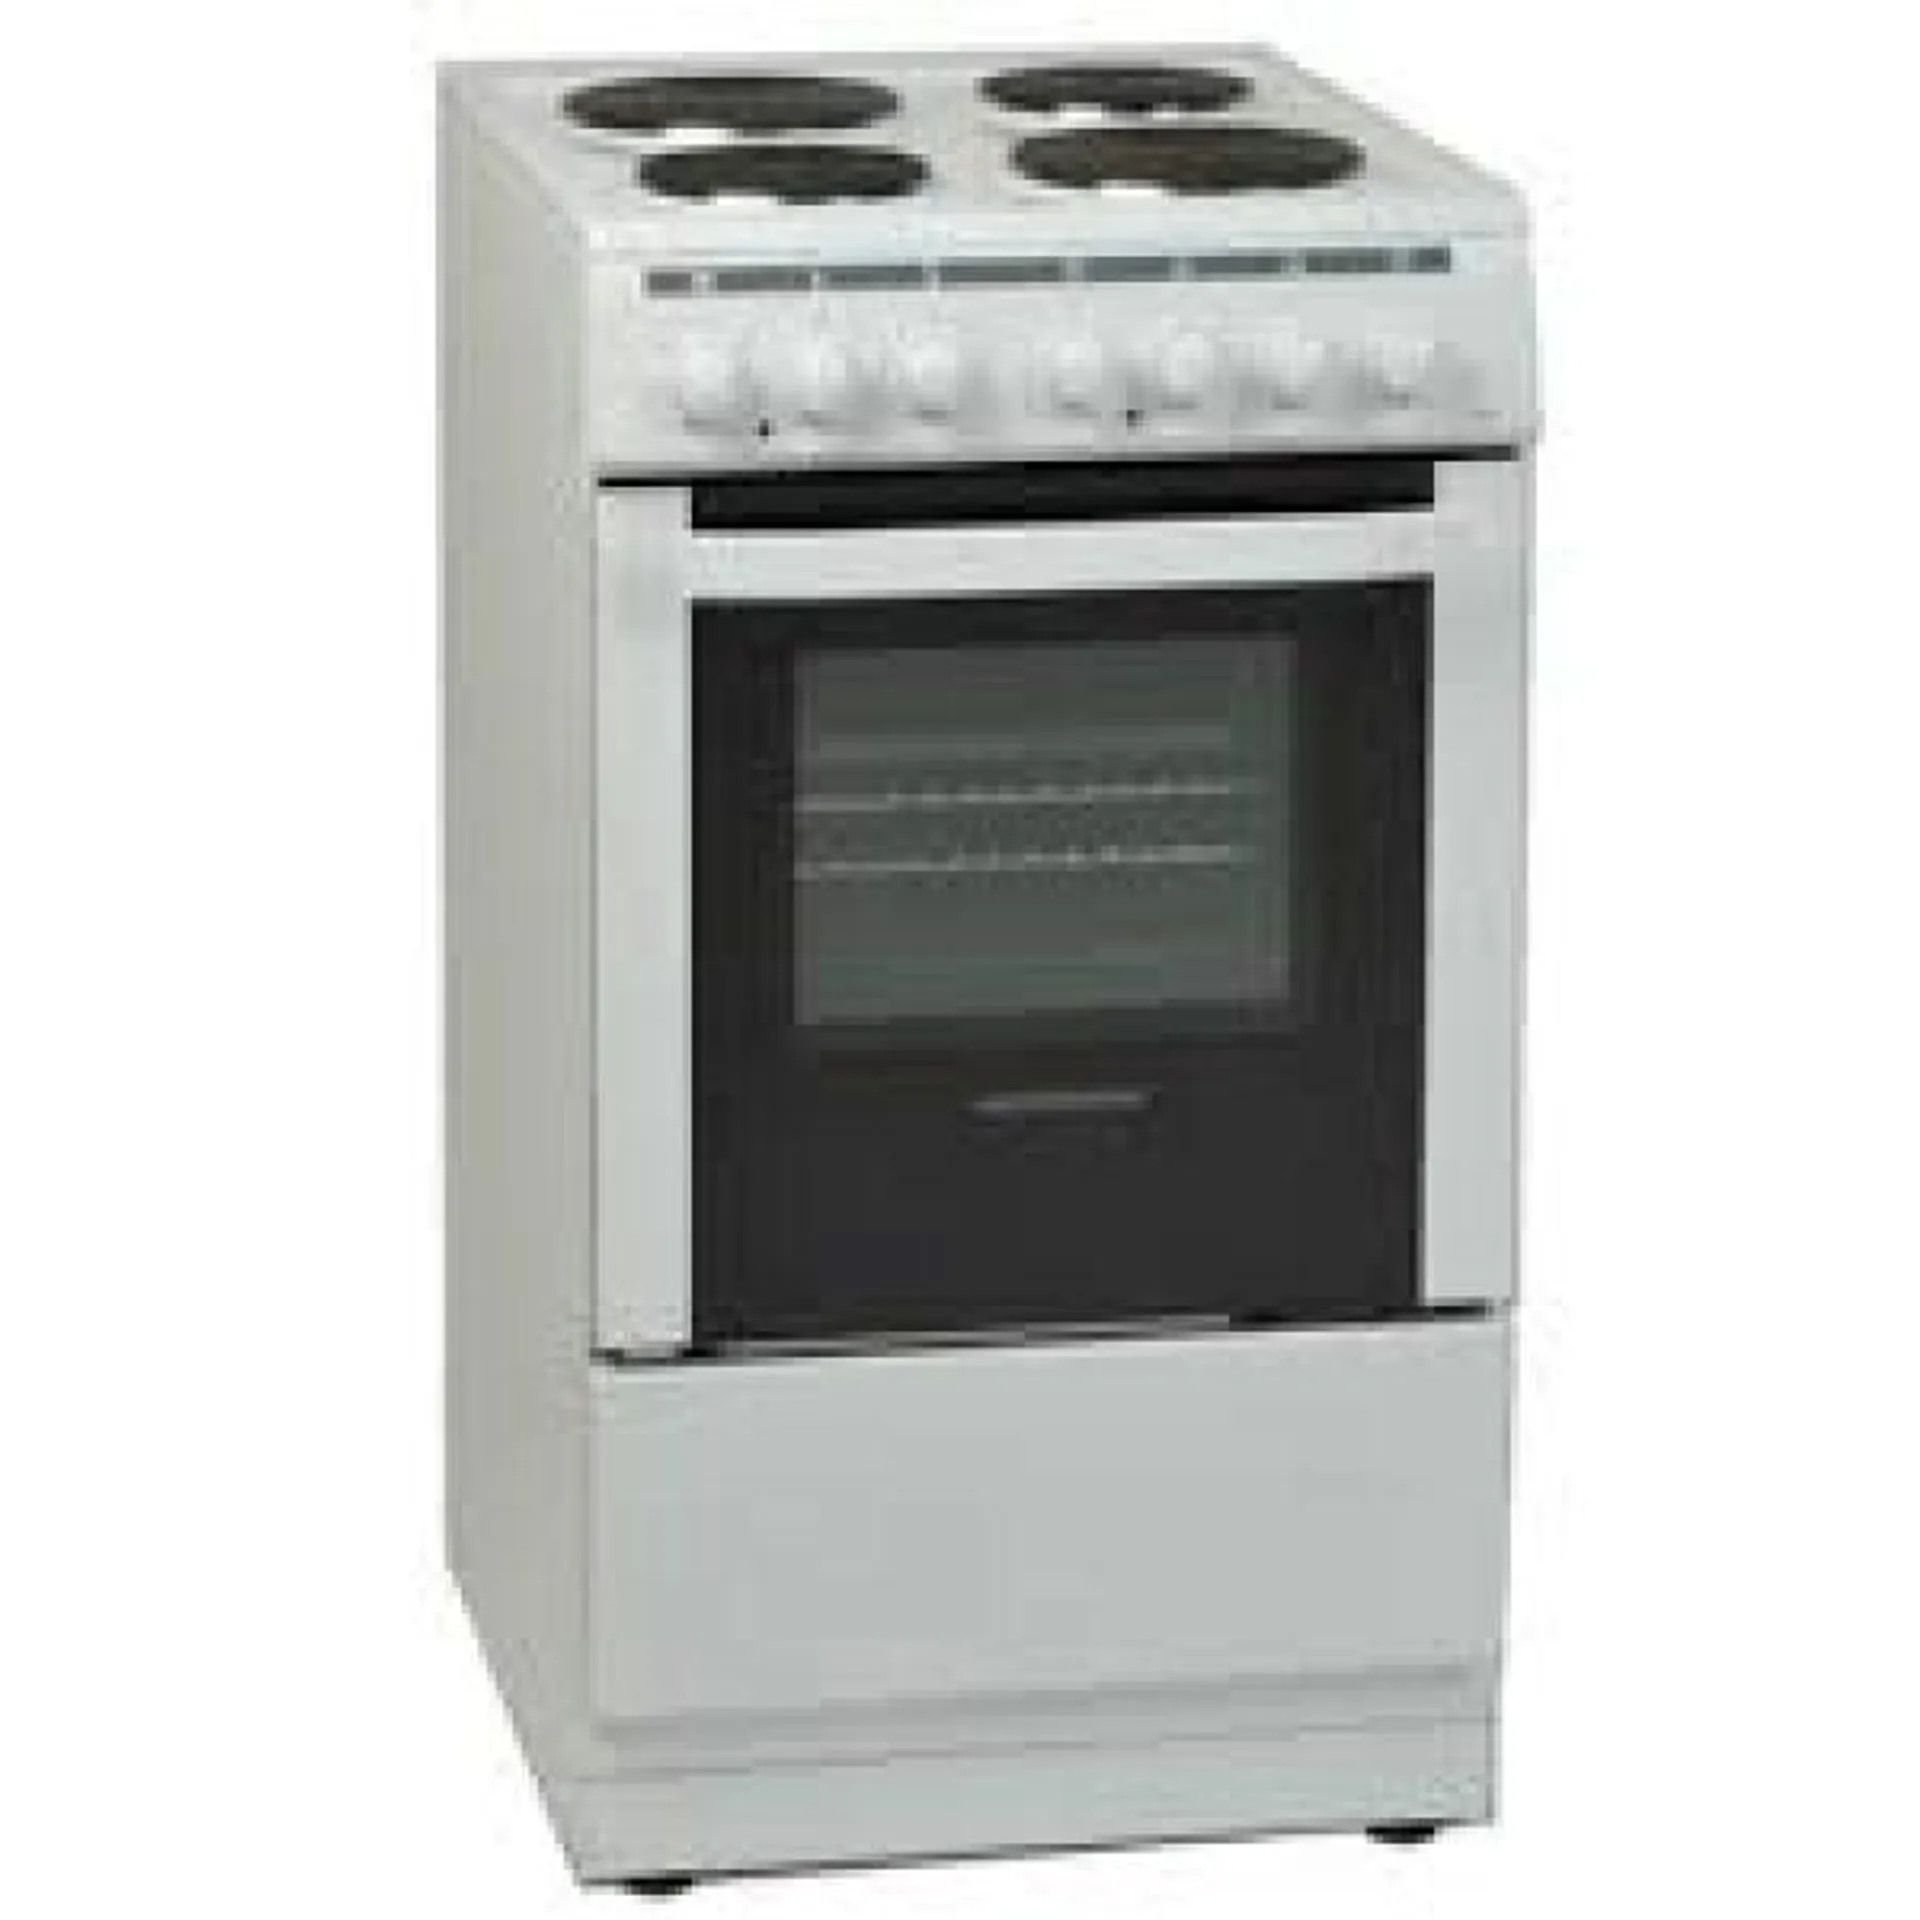 Nordmende 50cm Single Cavity Electric Cooker